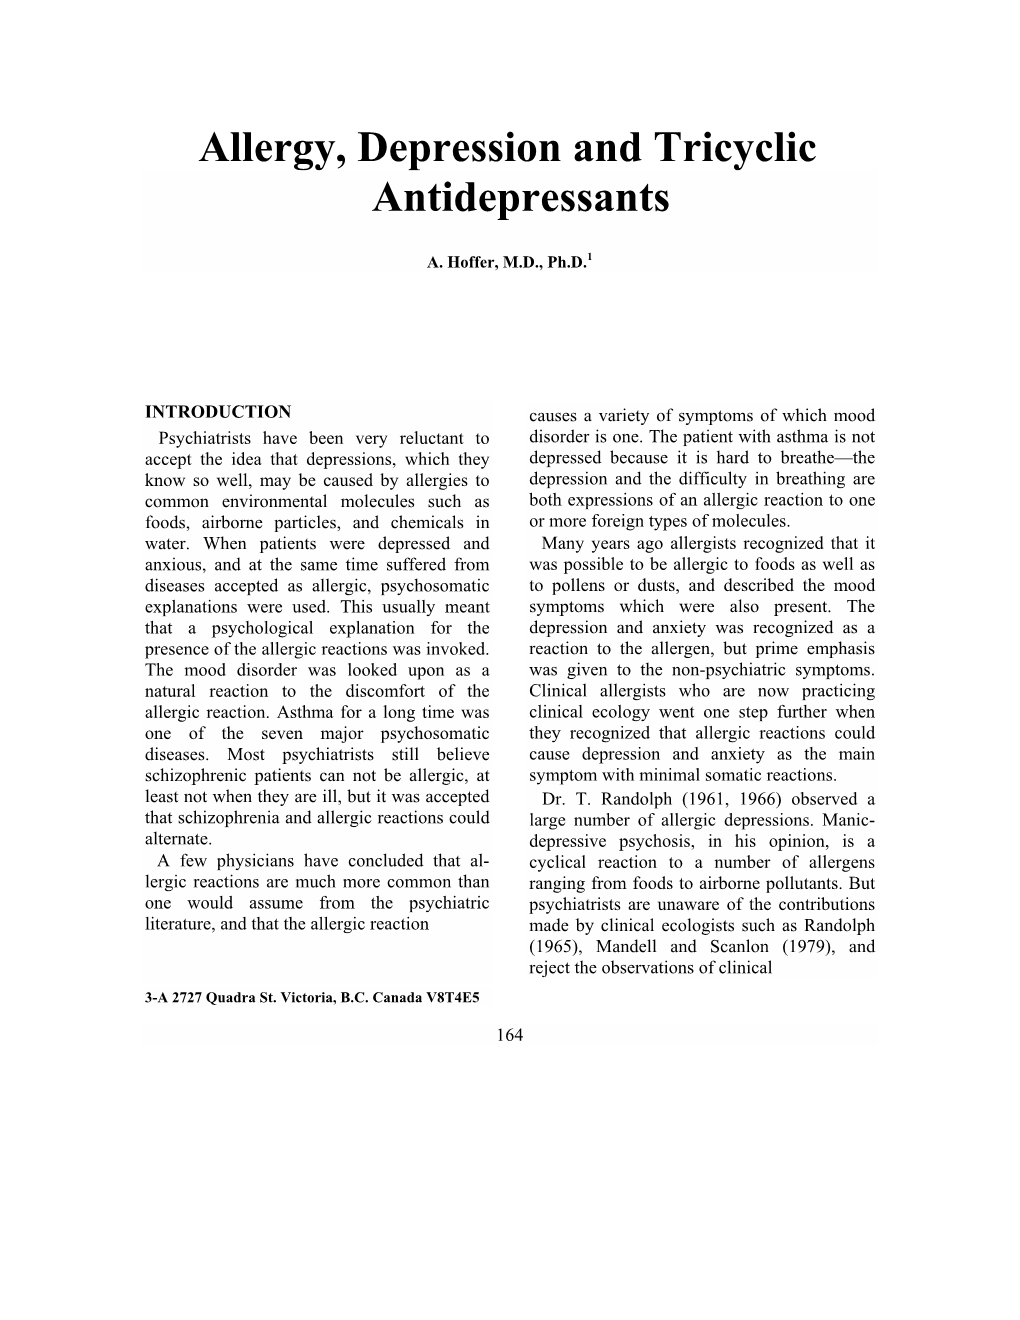 Allergy, Depression and Tricyclic Antidepressants